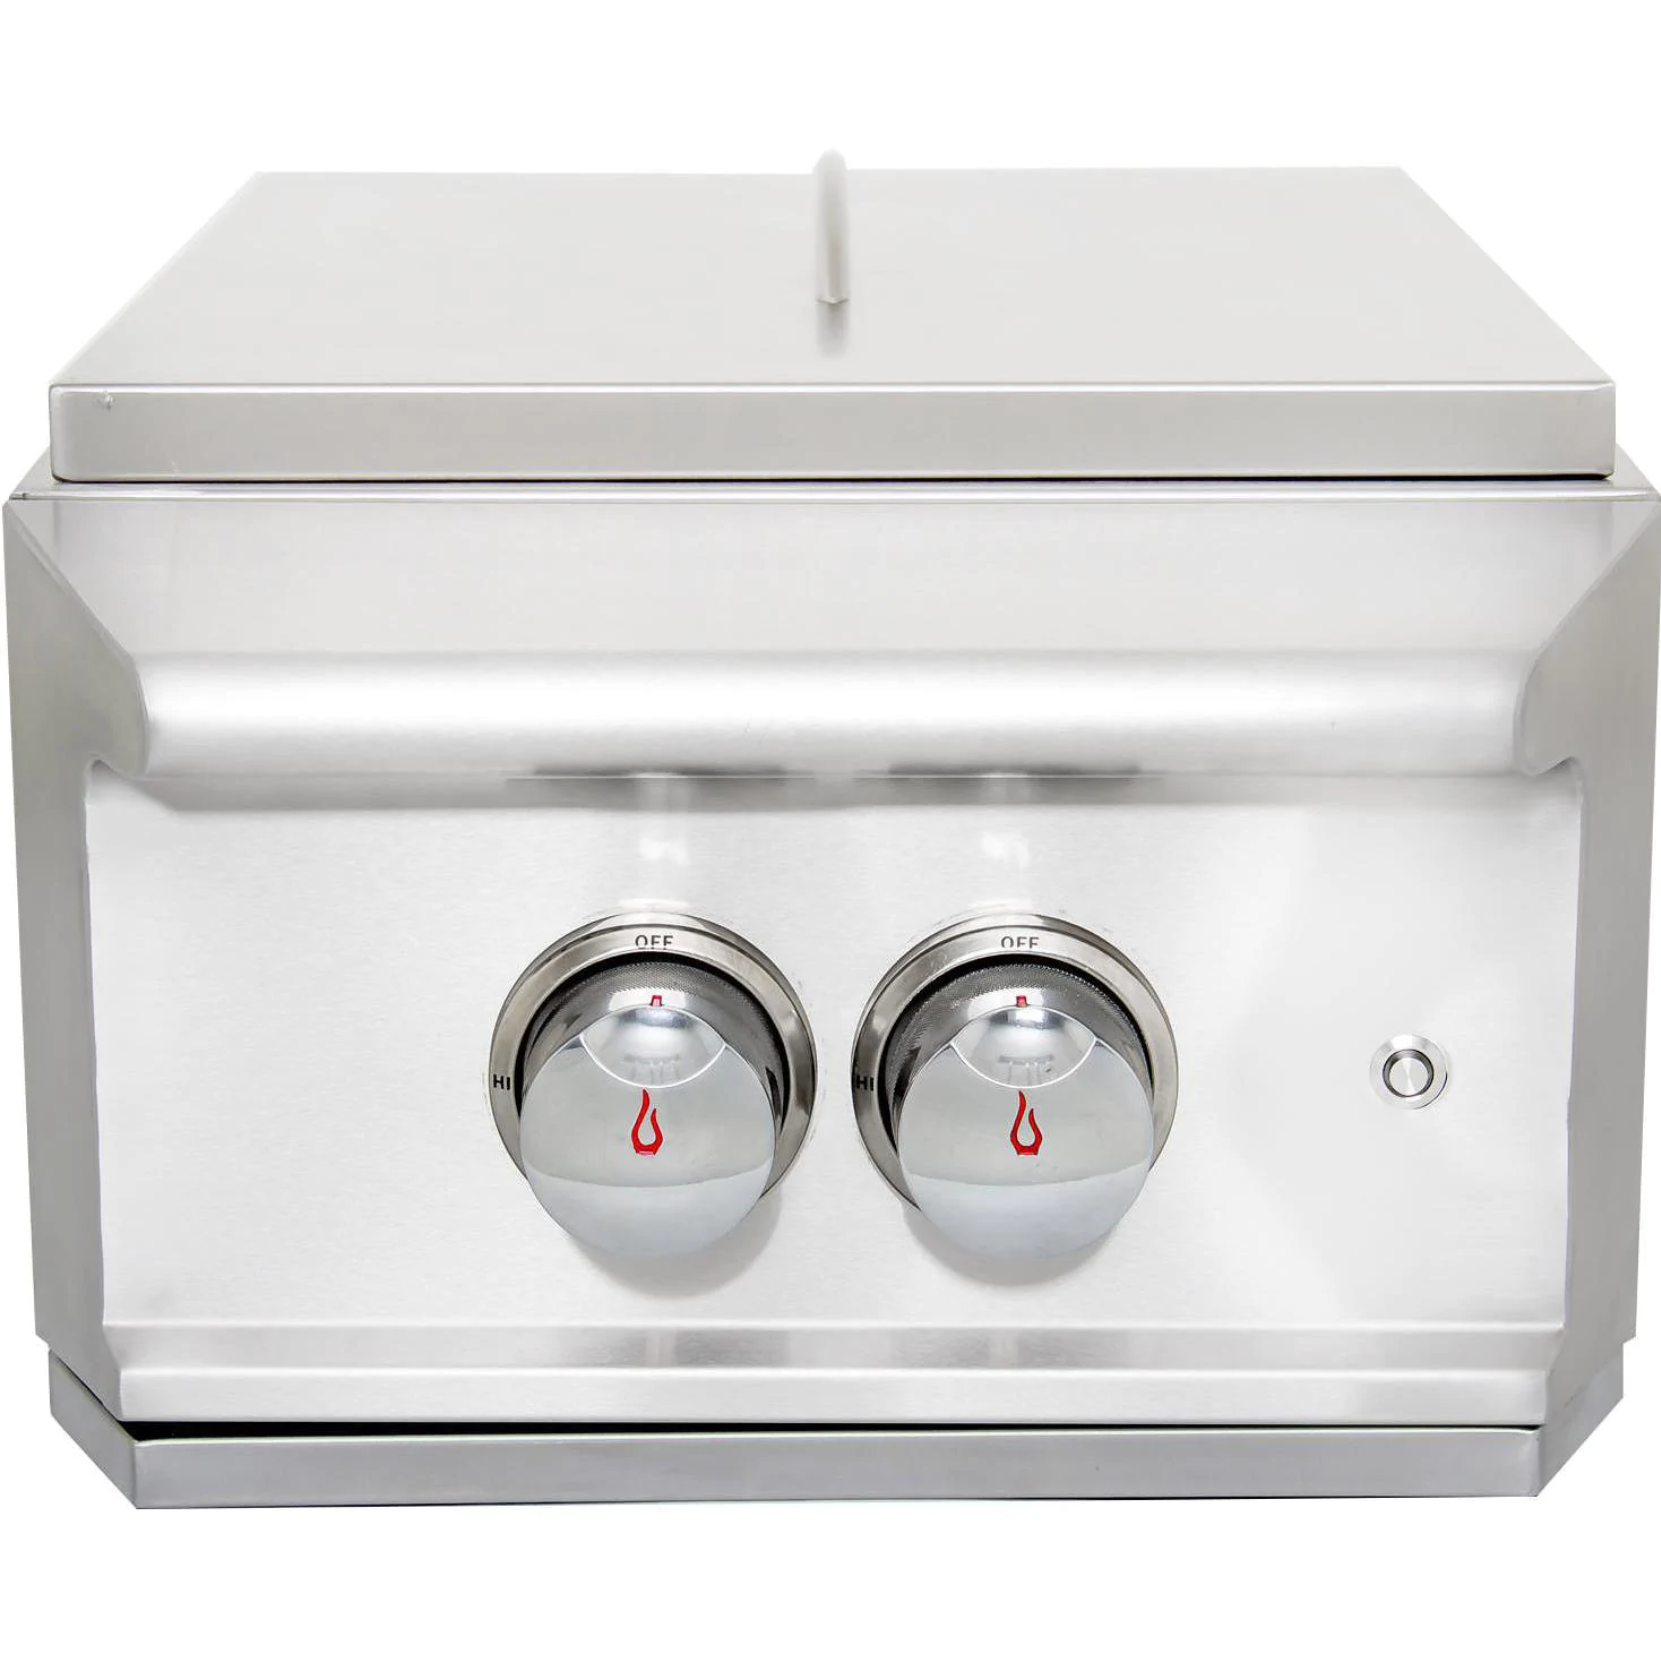 Blaze Professional LUX Built-In Gas High Performance Power Burner W/ Wok Ring & Stainless Steel Lid I The BBQHQ